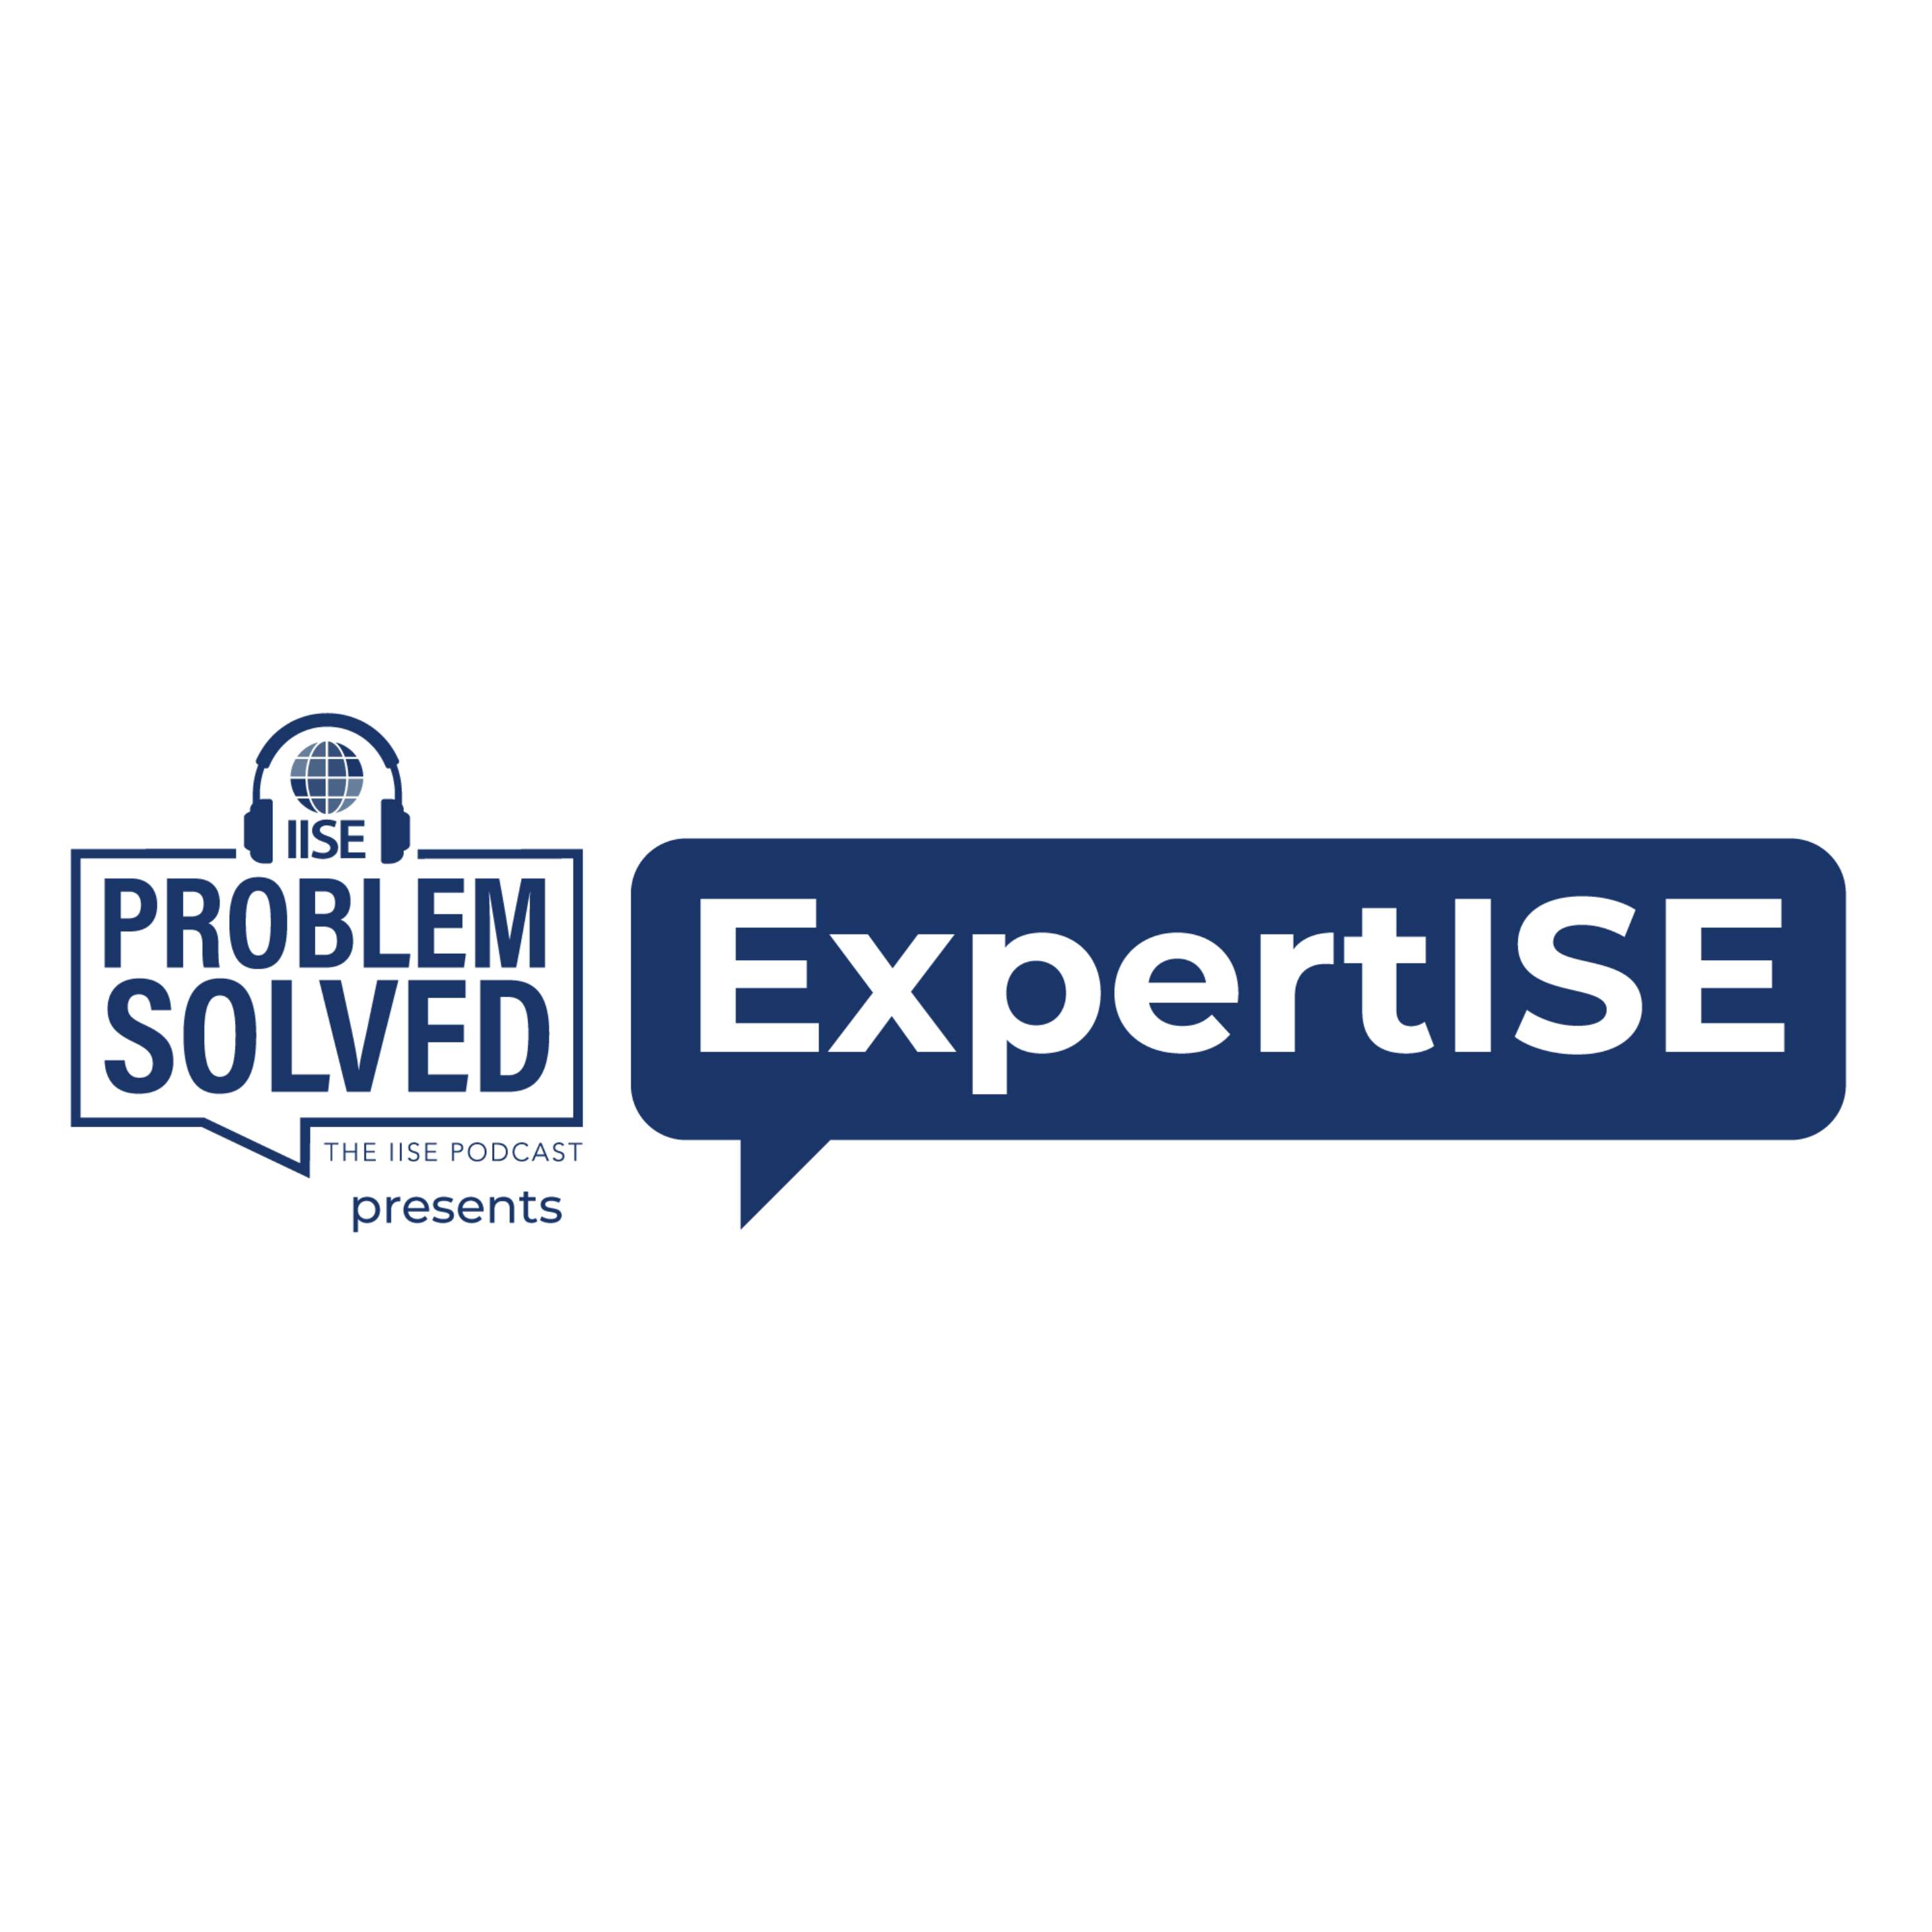 ExpertISE: Job outlook for ISEs